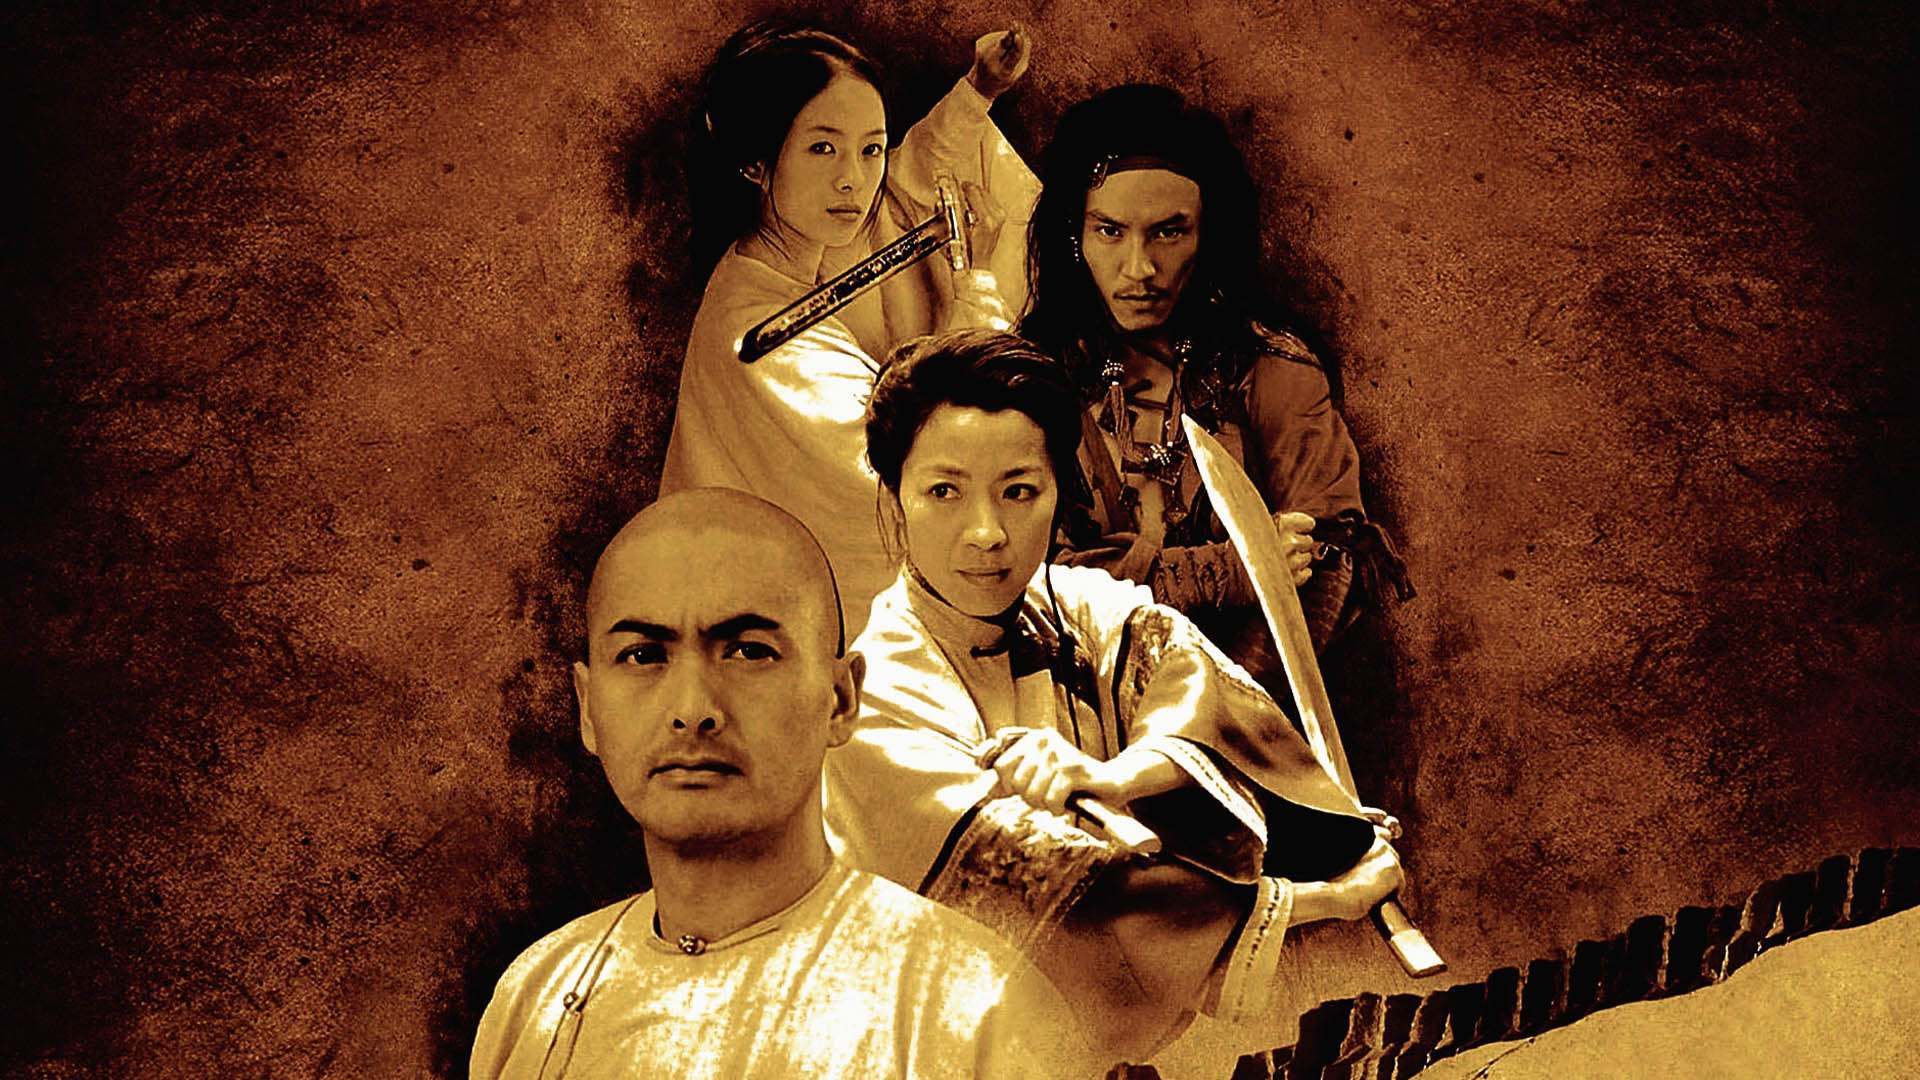 The main characters of the movie Crouching Tiger, Hidden Dragon